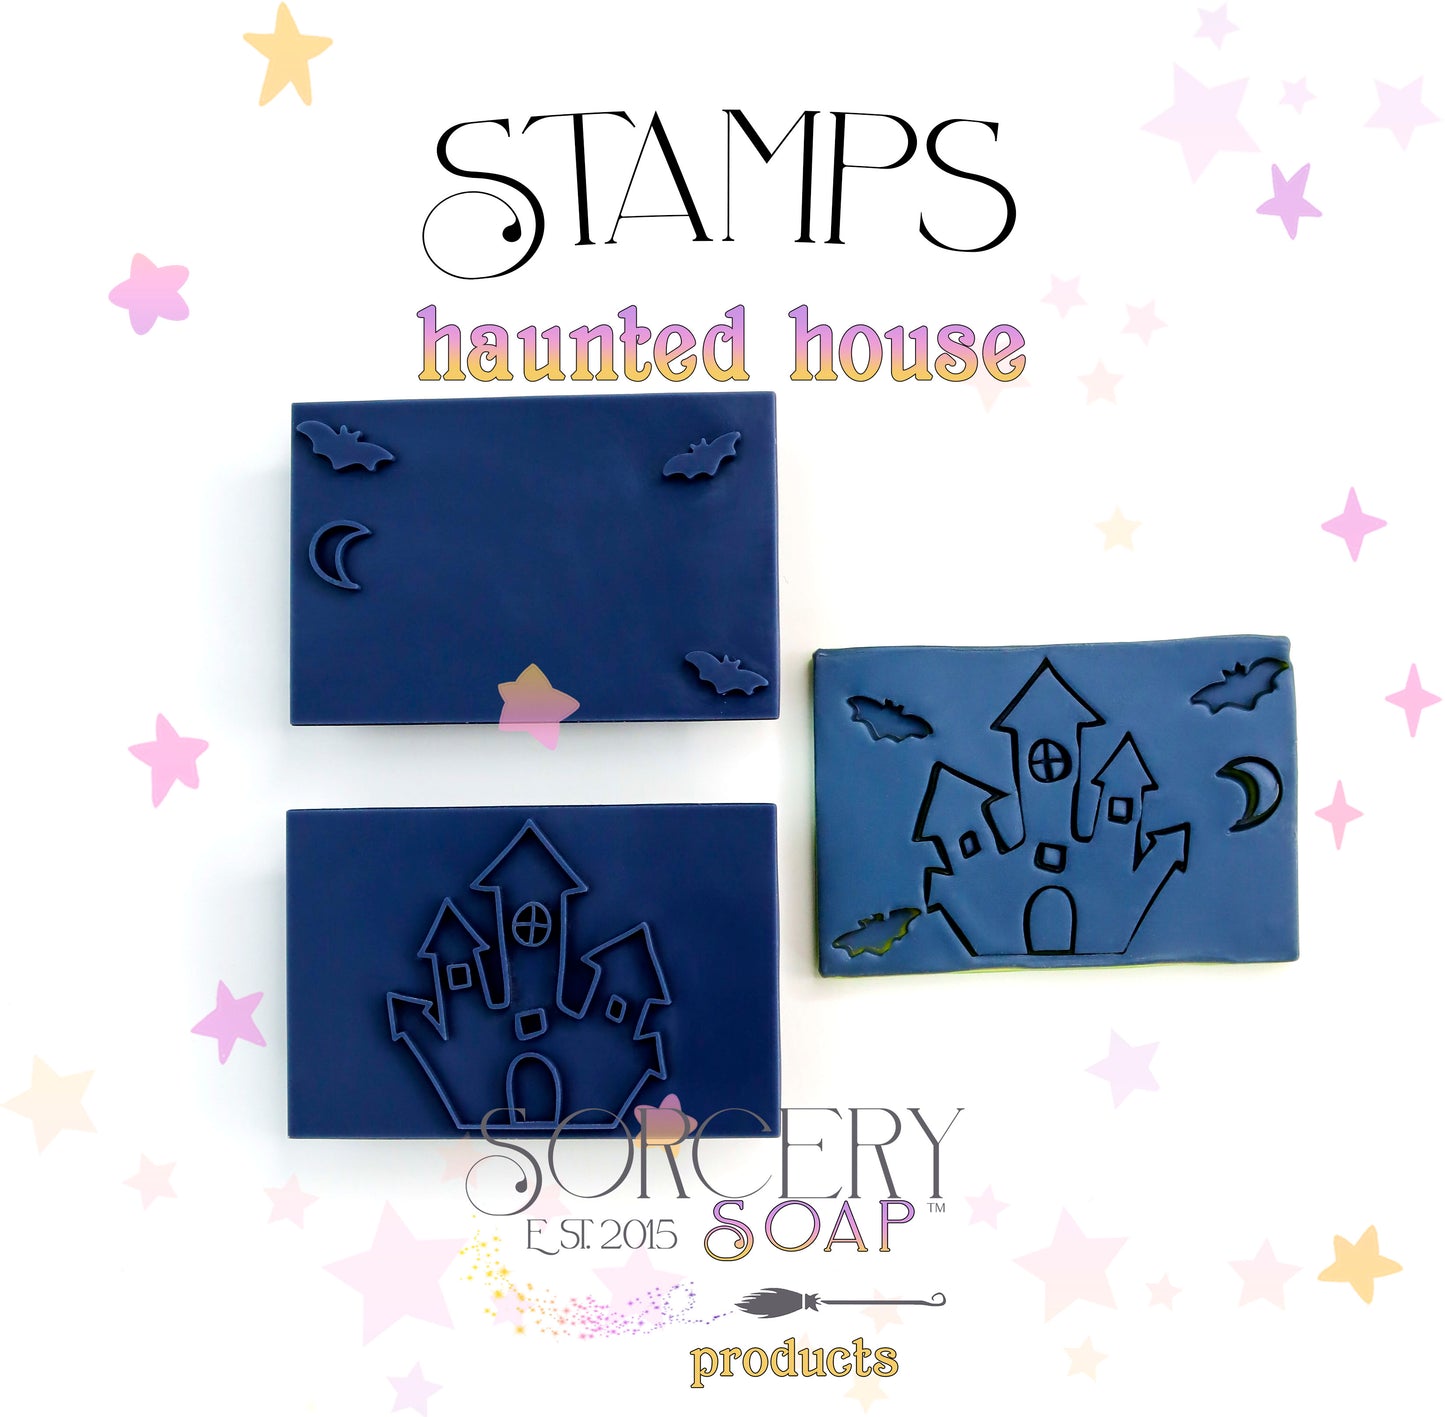 Haunted House Stamps